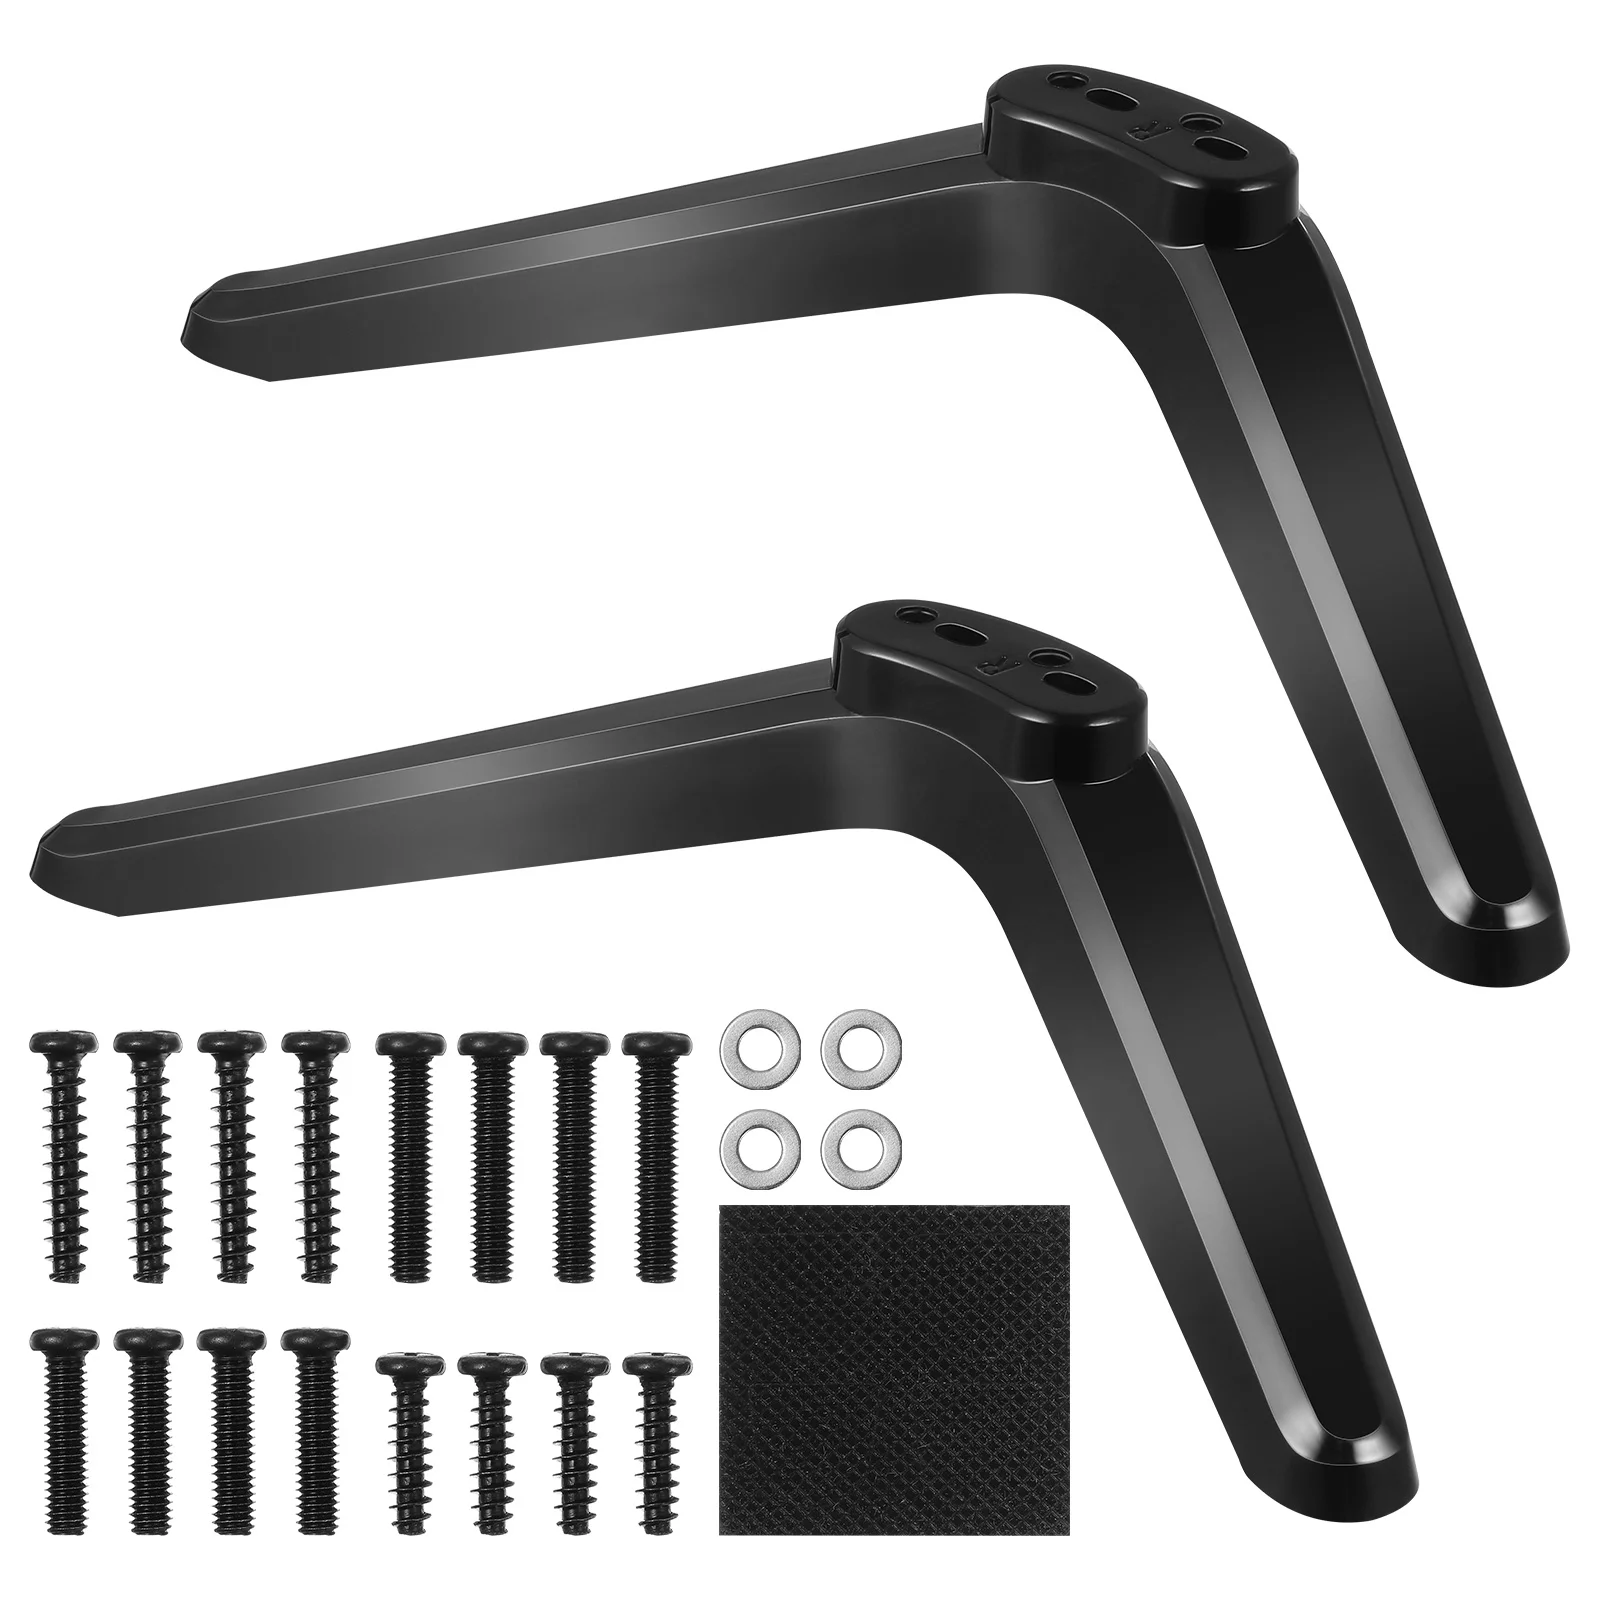 

2 Pcs Stand Table Top Mount Bracket Brackets With Plastic Stands Television Mounts